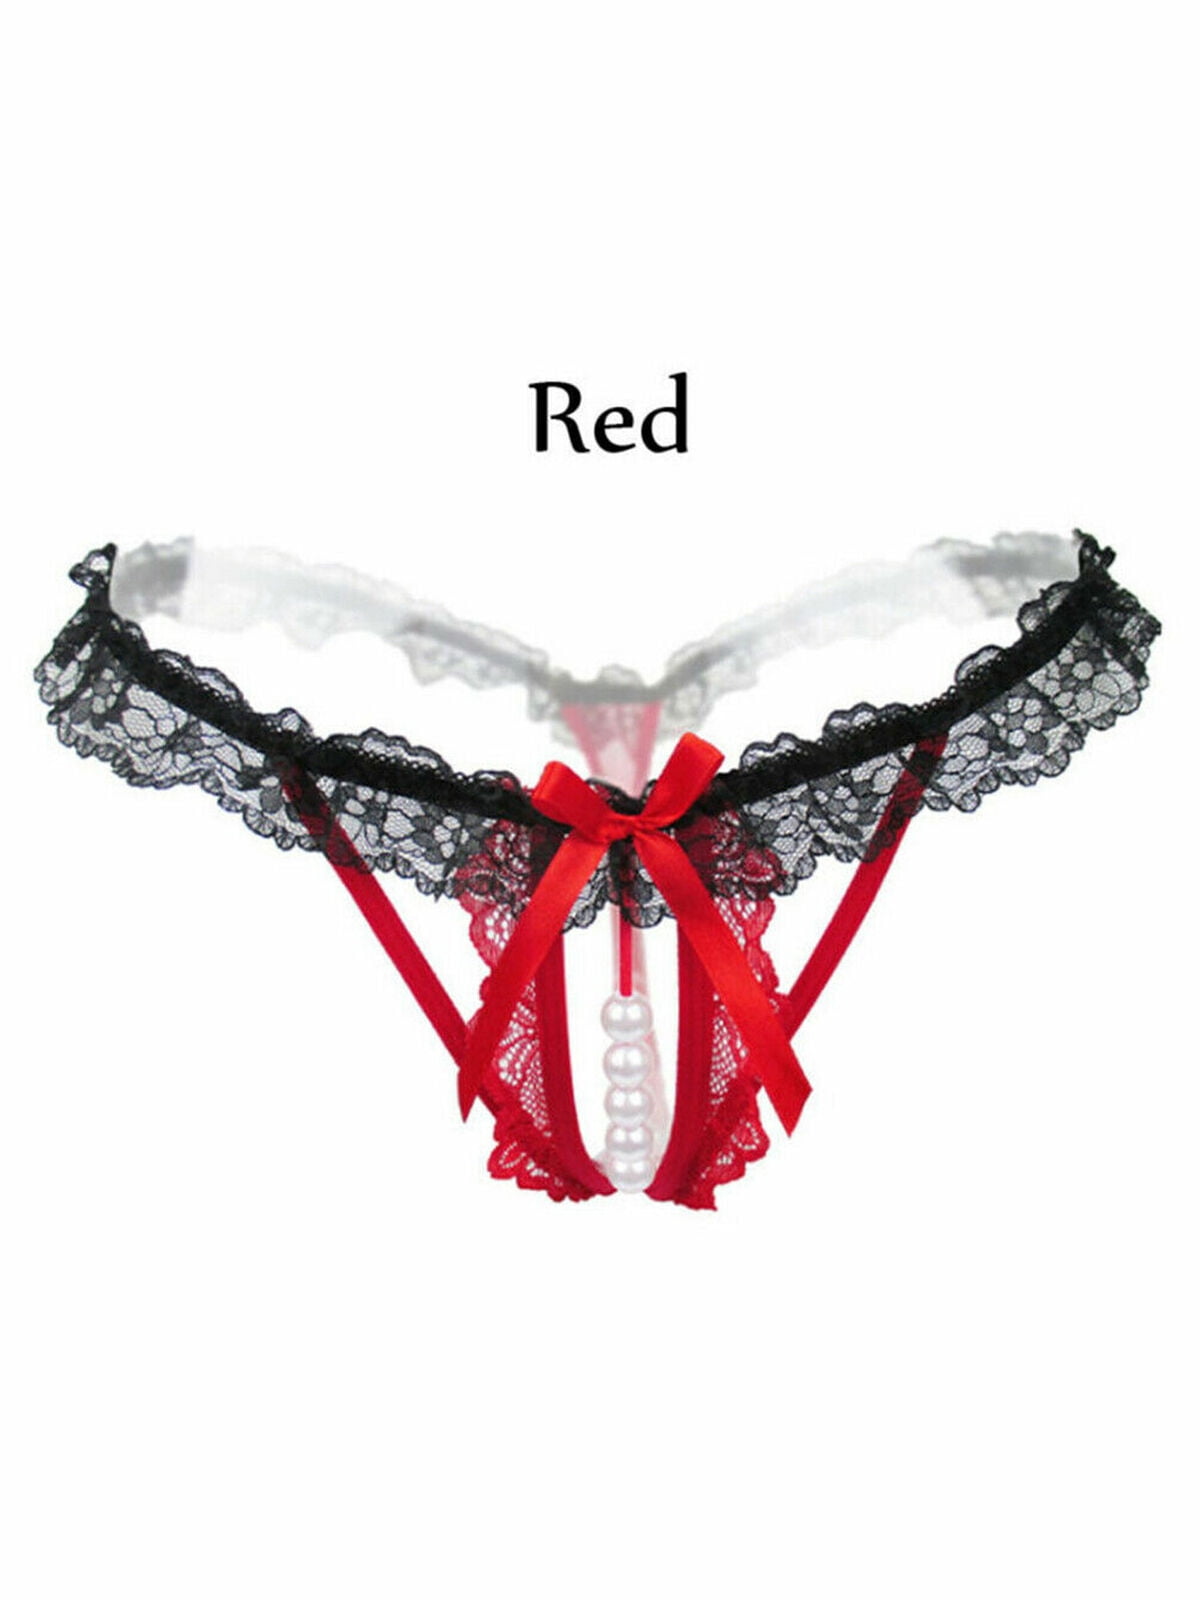 G-String Thongs Panties Open Crotch Bowknot Women Tiny Underwear Exotic Lingerie